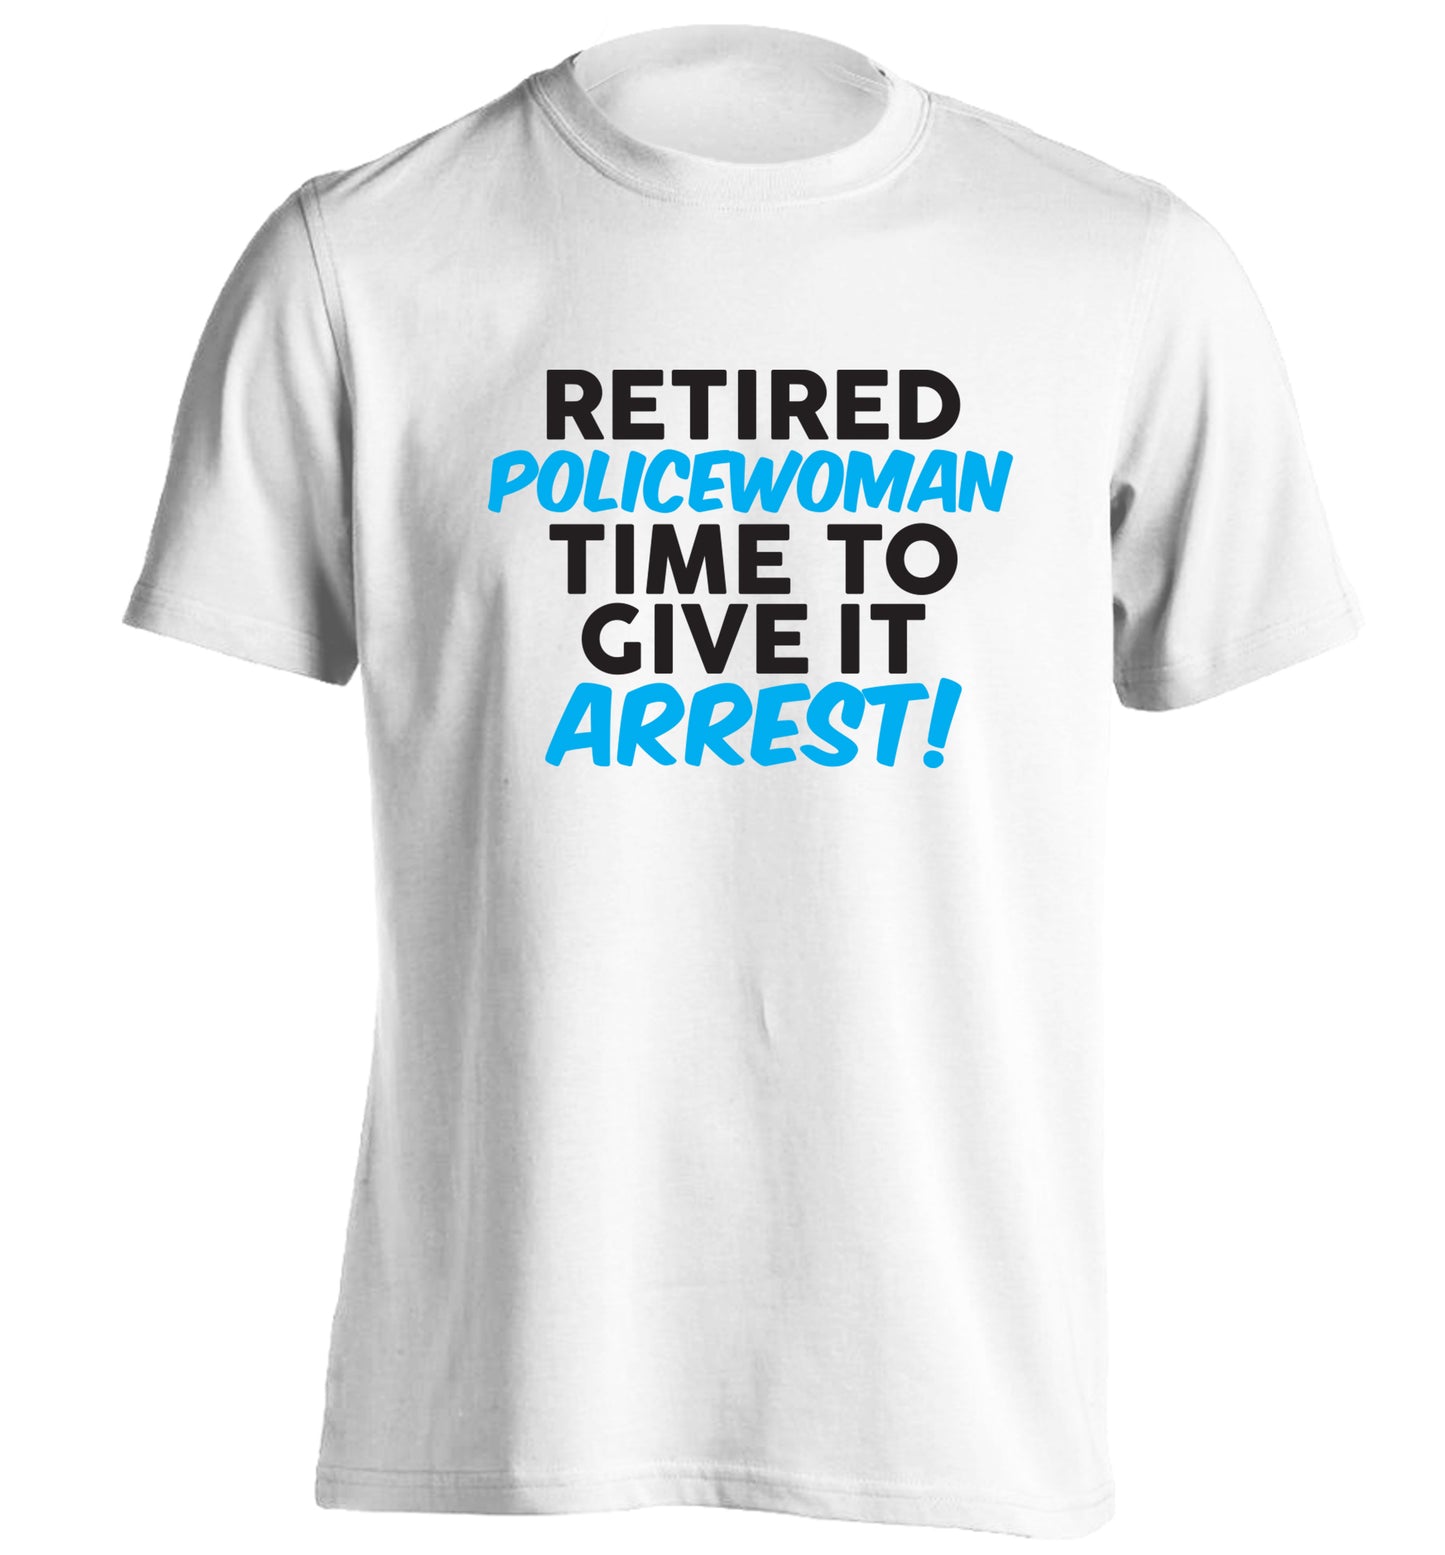 Retired policewoman time to give it arrest adults unisex white Tshirt 2XL